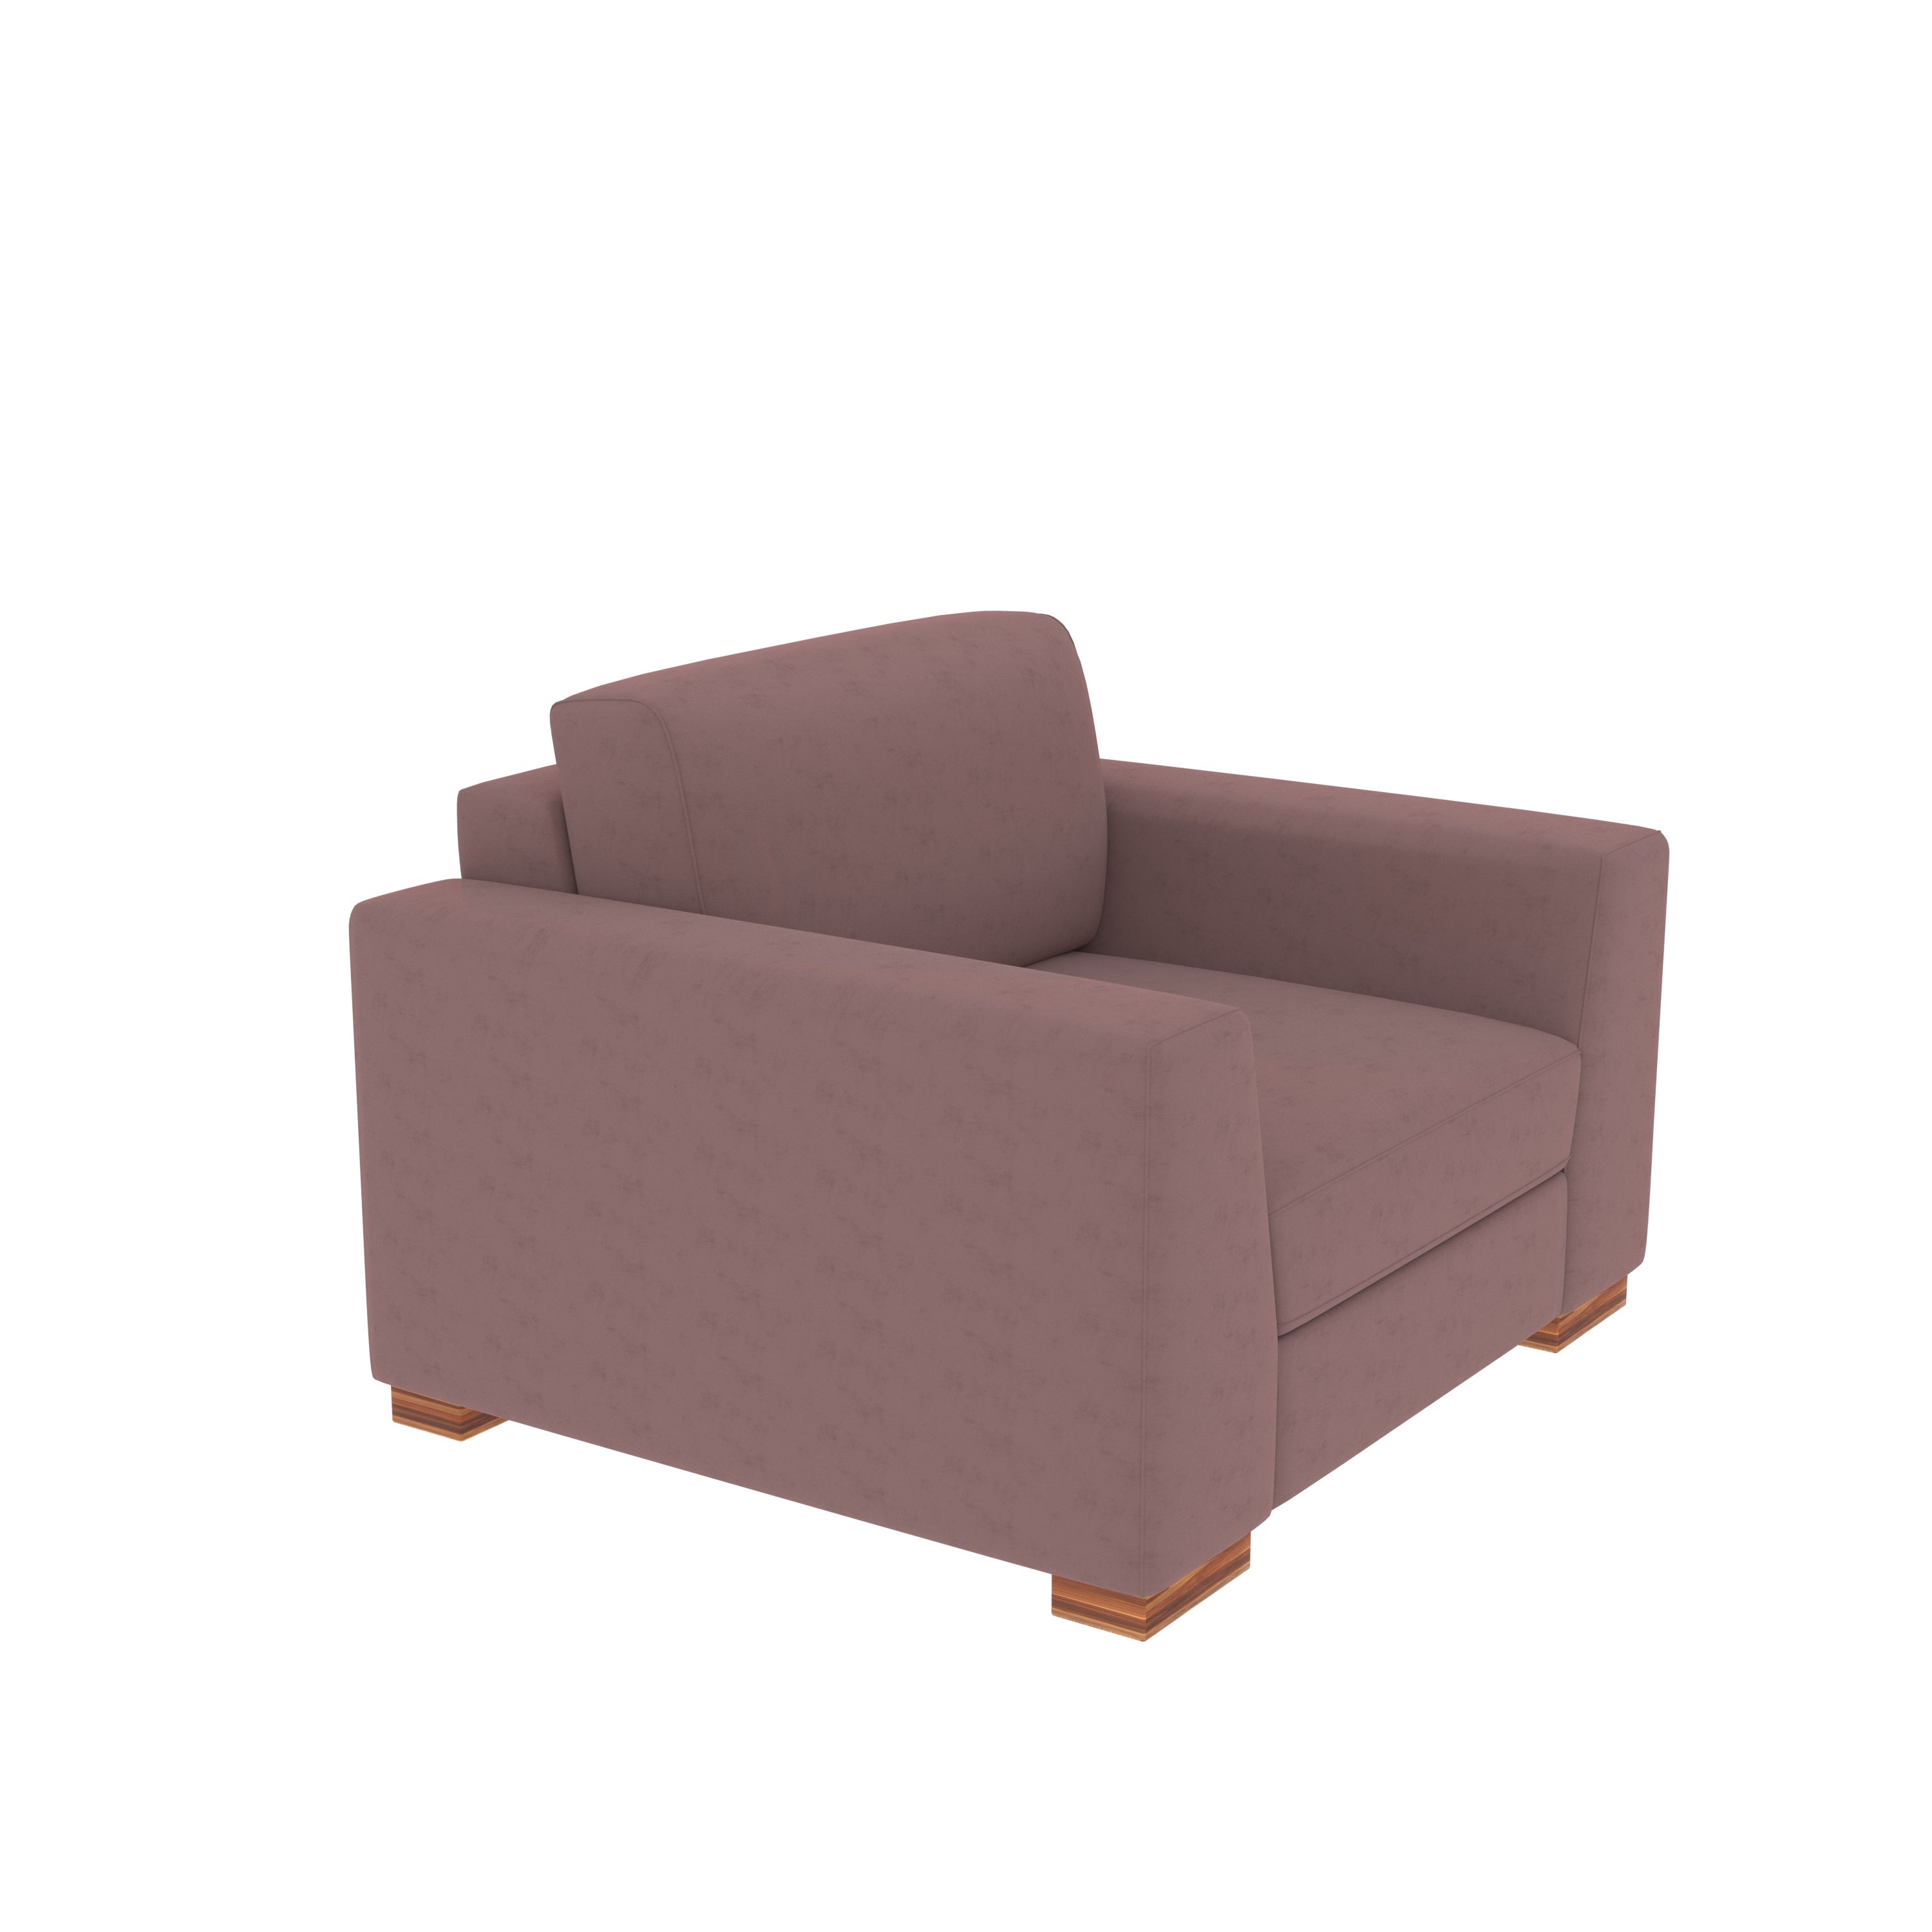 Indian Red Pastel Coloured Comfort 2+1 Seater Sofa + Center Table for Home Sofa